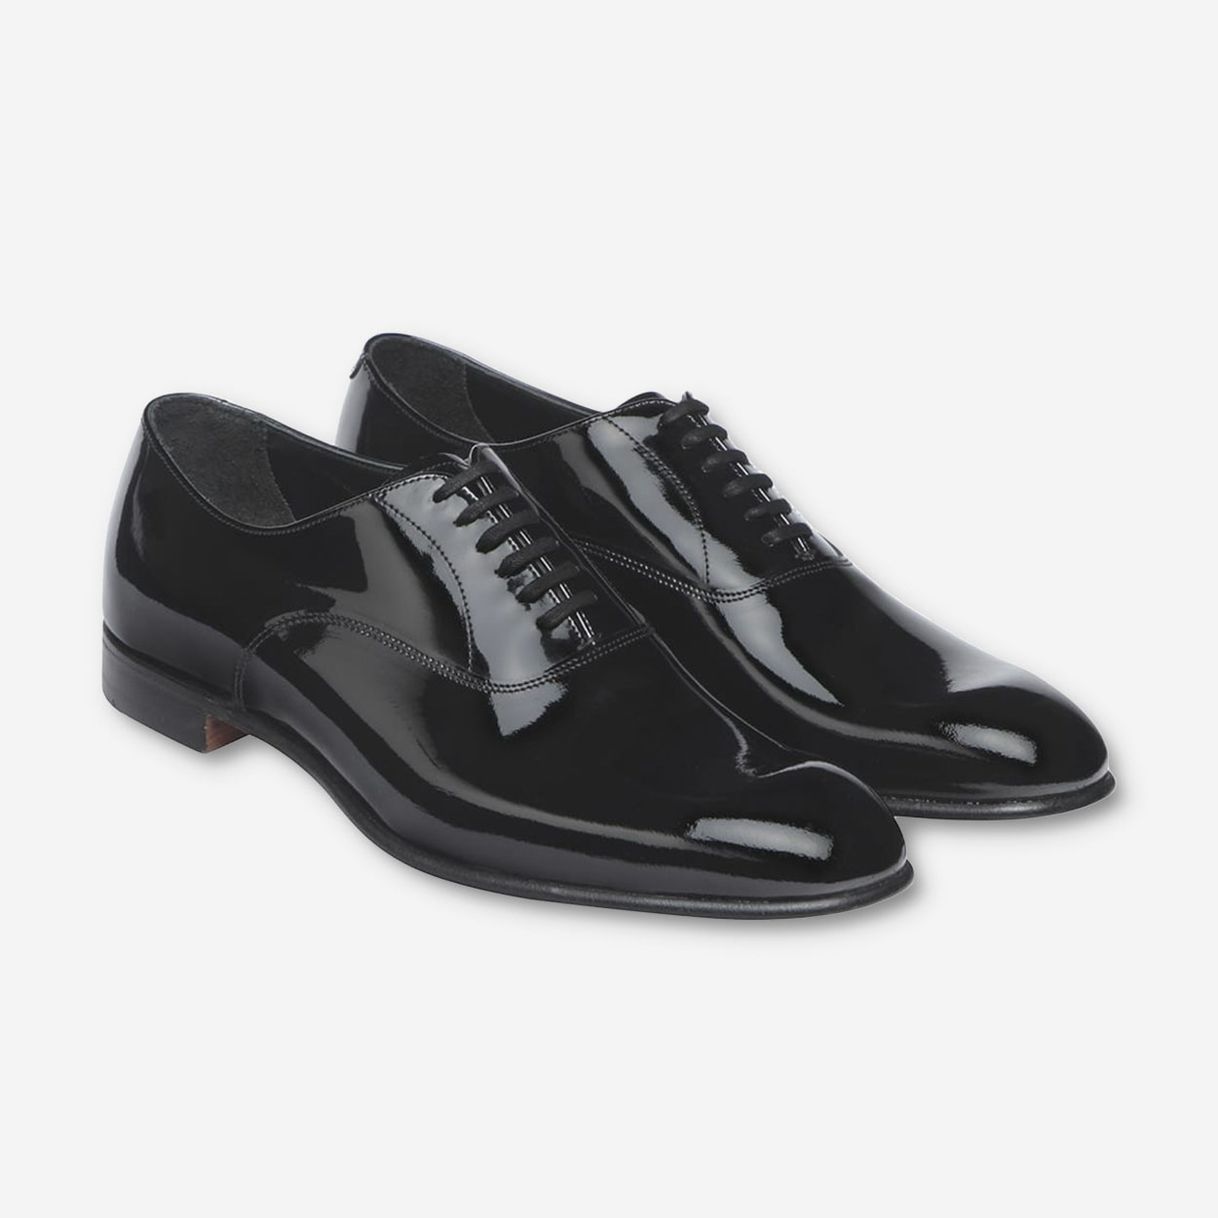 Cheany Patent Oxford Dress Shoes